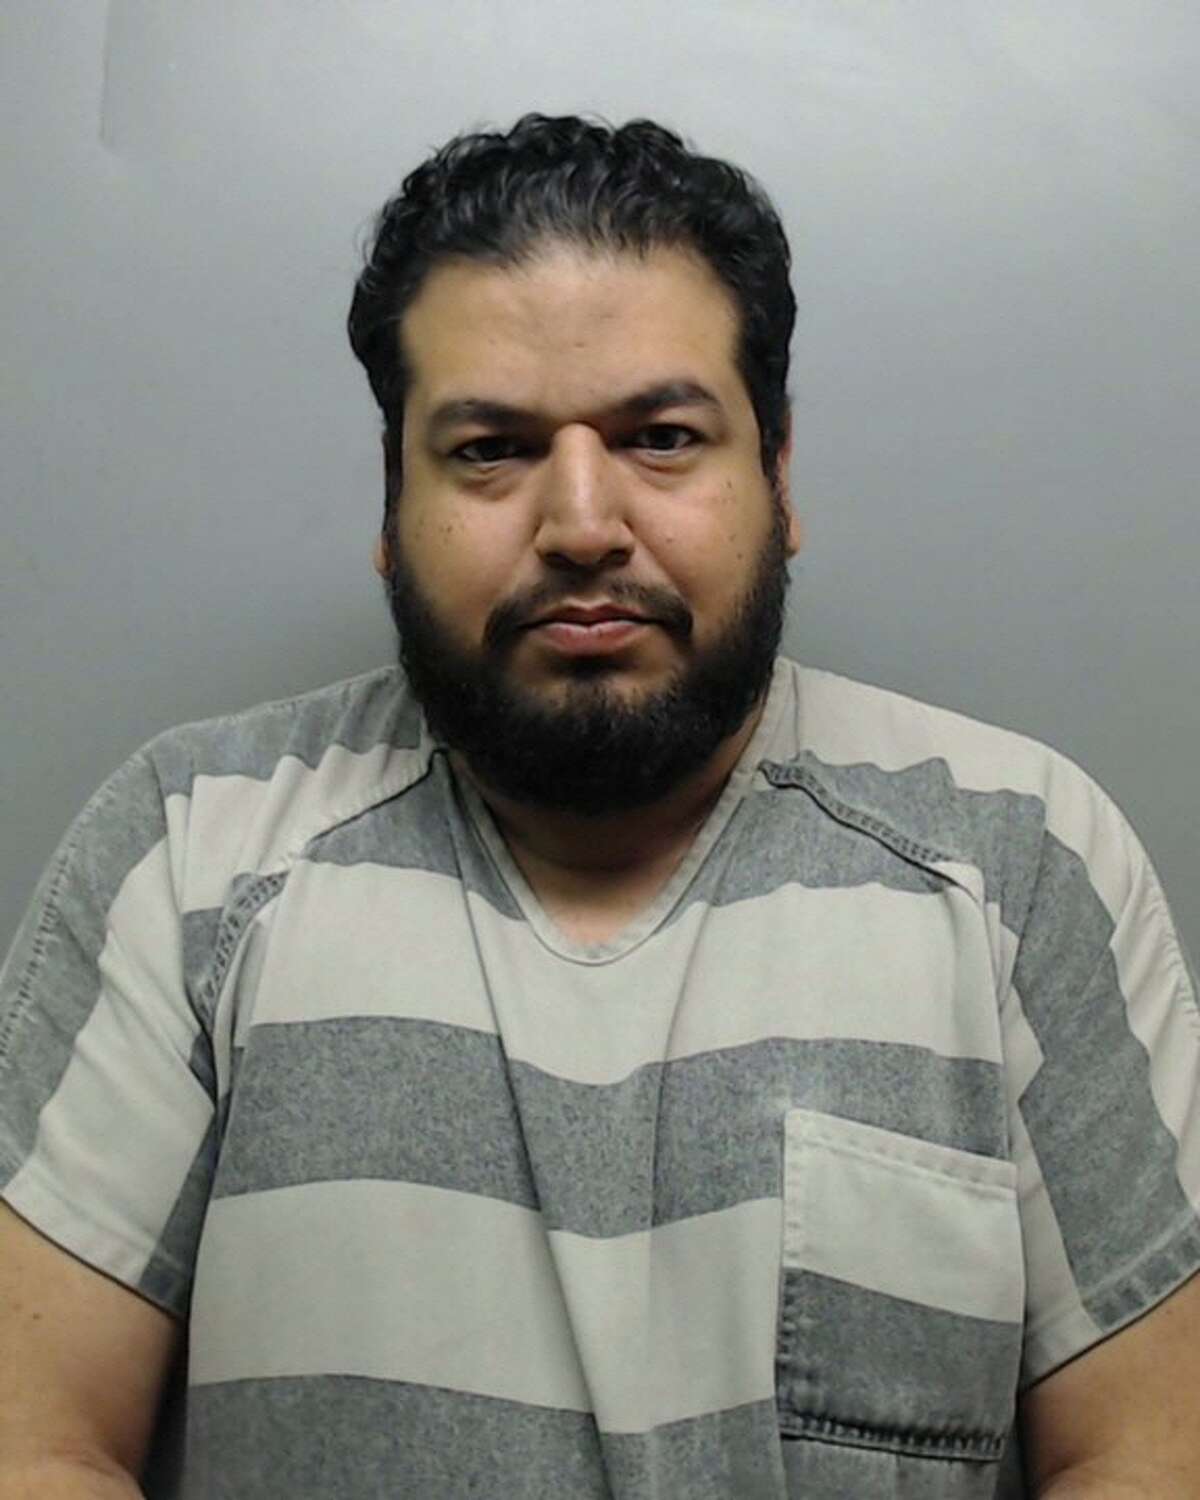 Ruben Guillermo Ulloa, 37, was served with a warrant charging him with sexual assault.